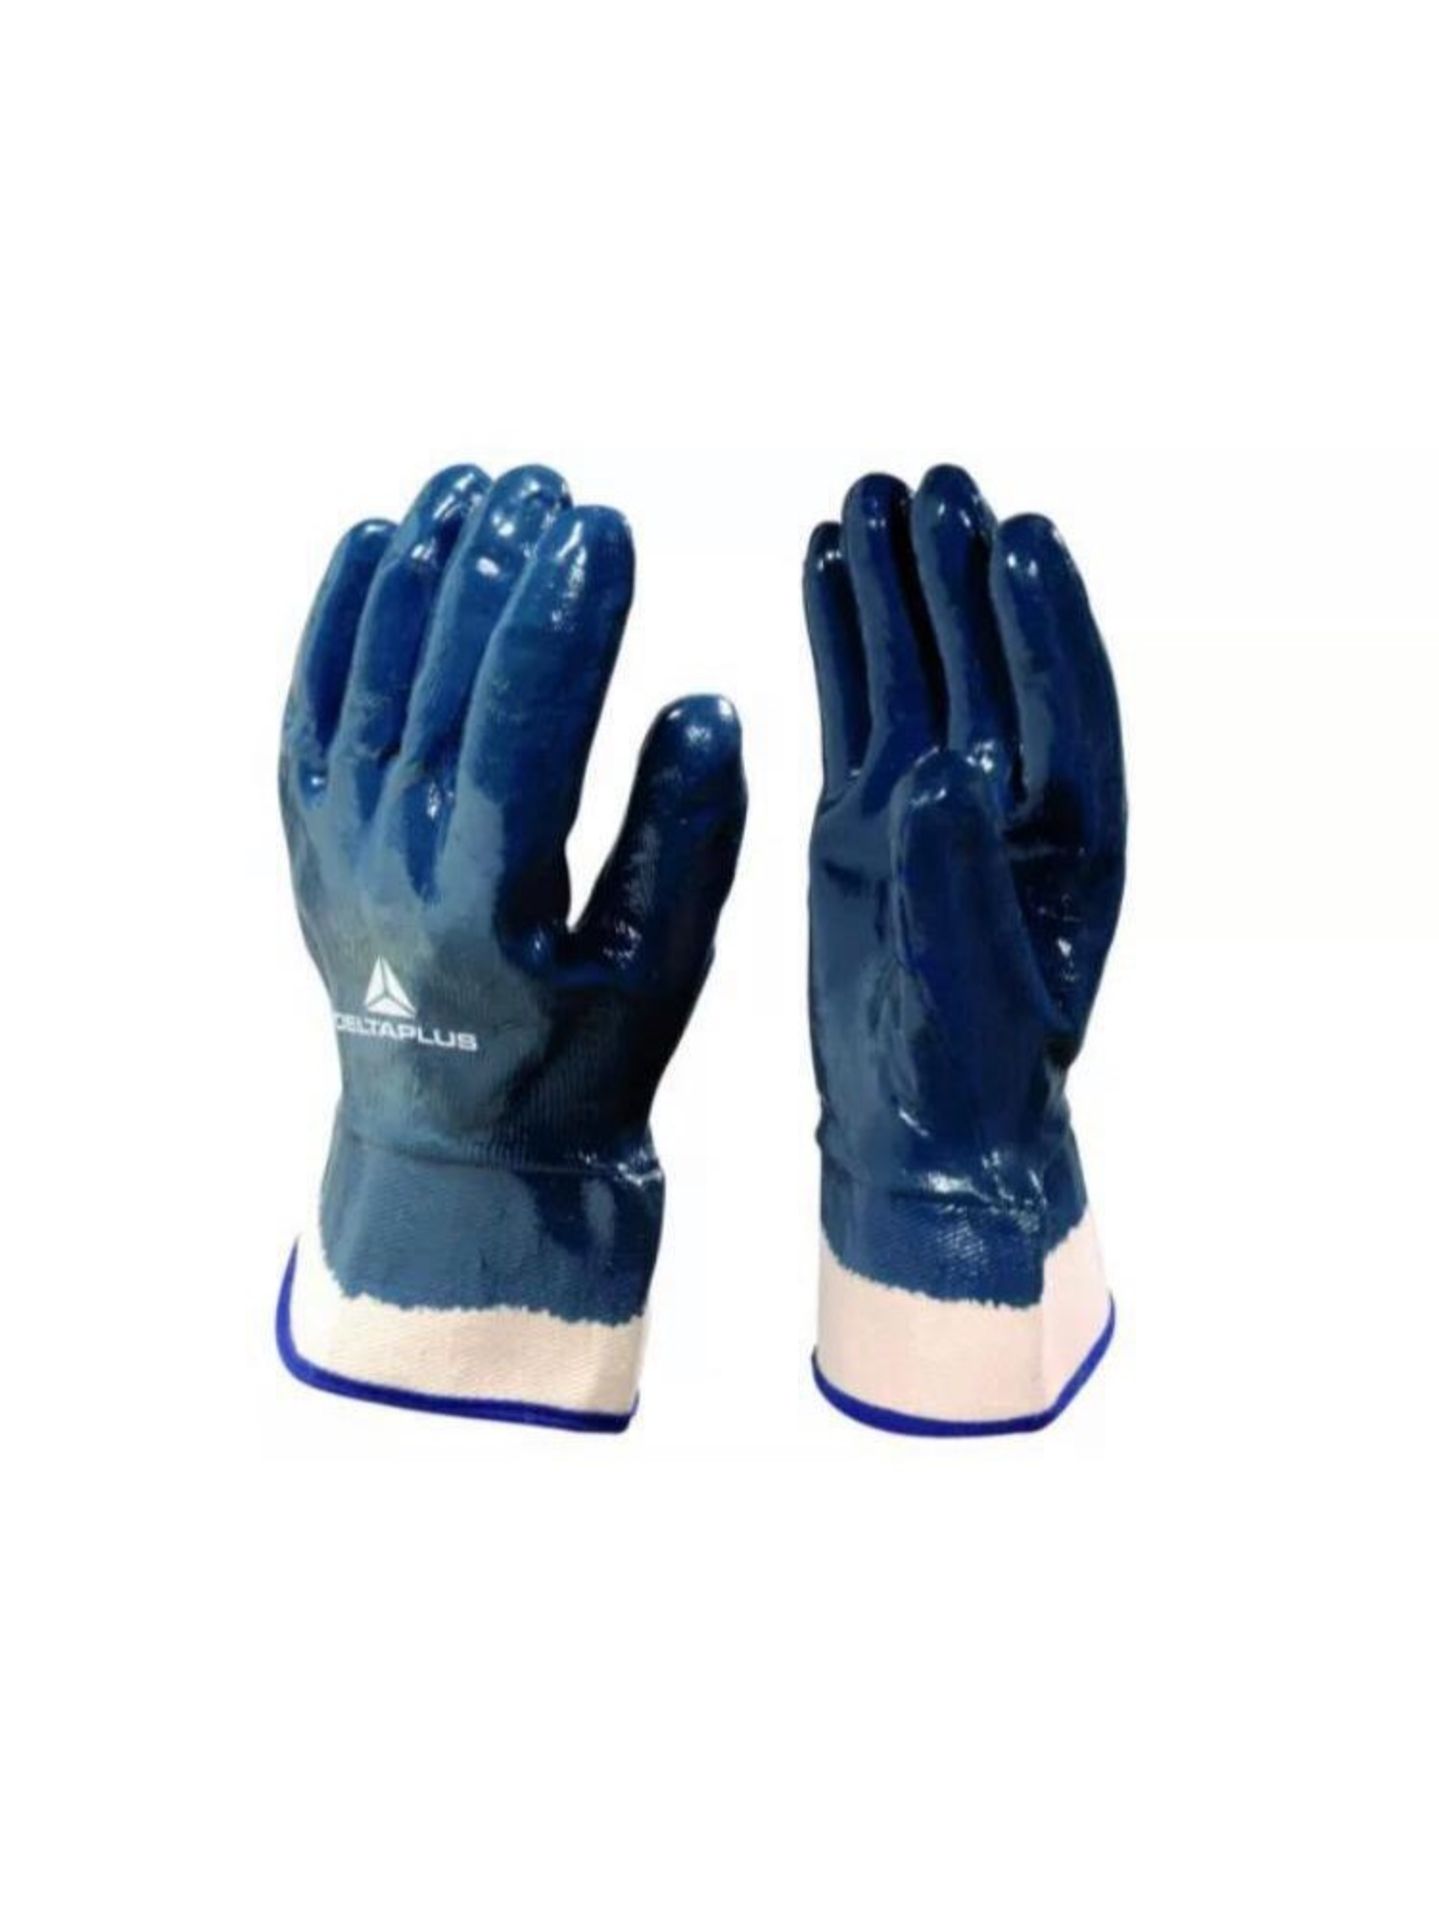 60 Pairs of Delta Plus NI175 Heavy Duty Blue Nitrile Open Cuff Work Gloves Size 10 XL Glove RRP £260